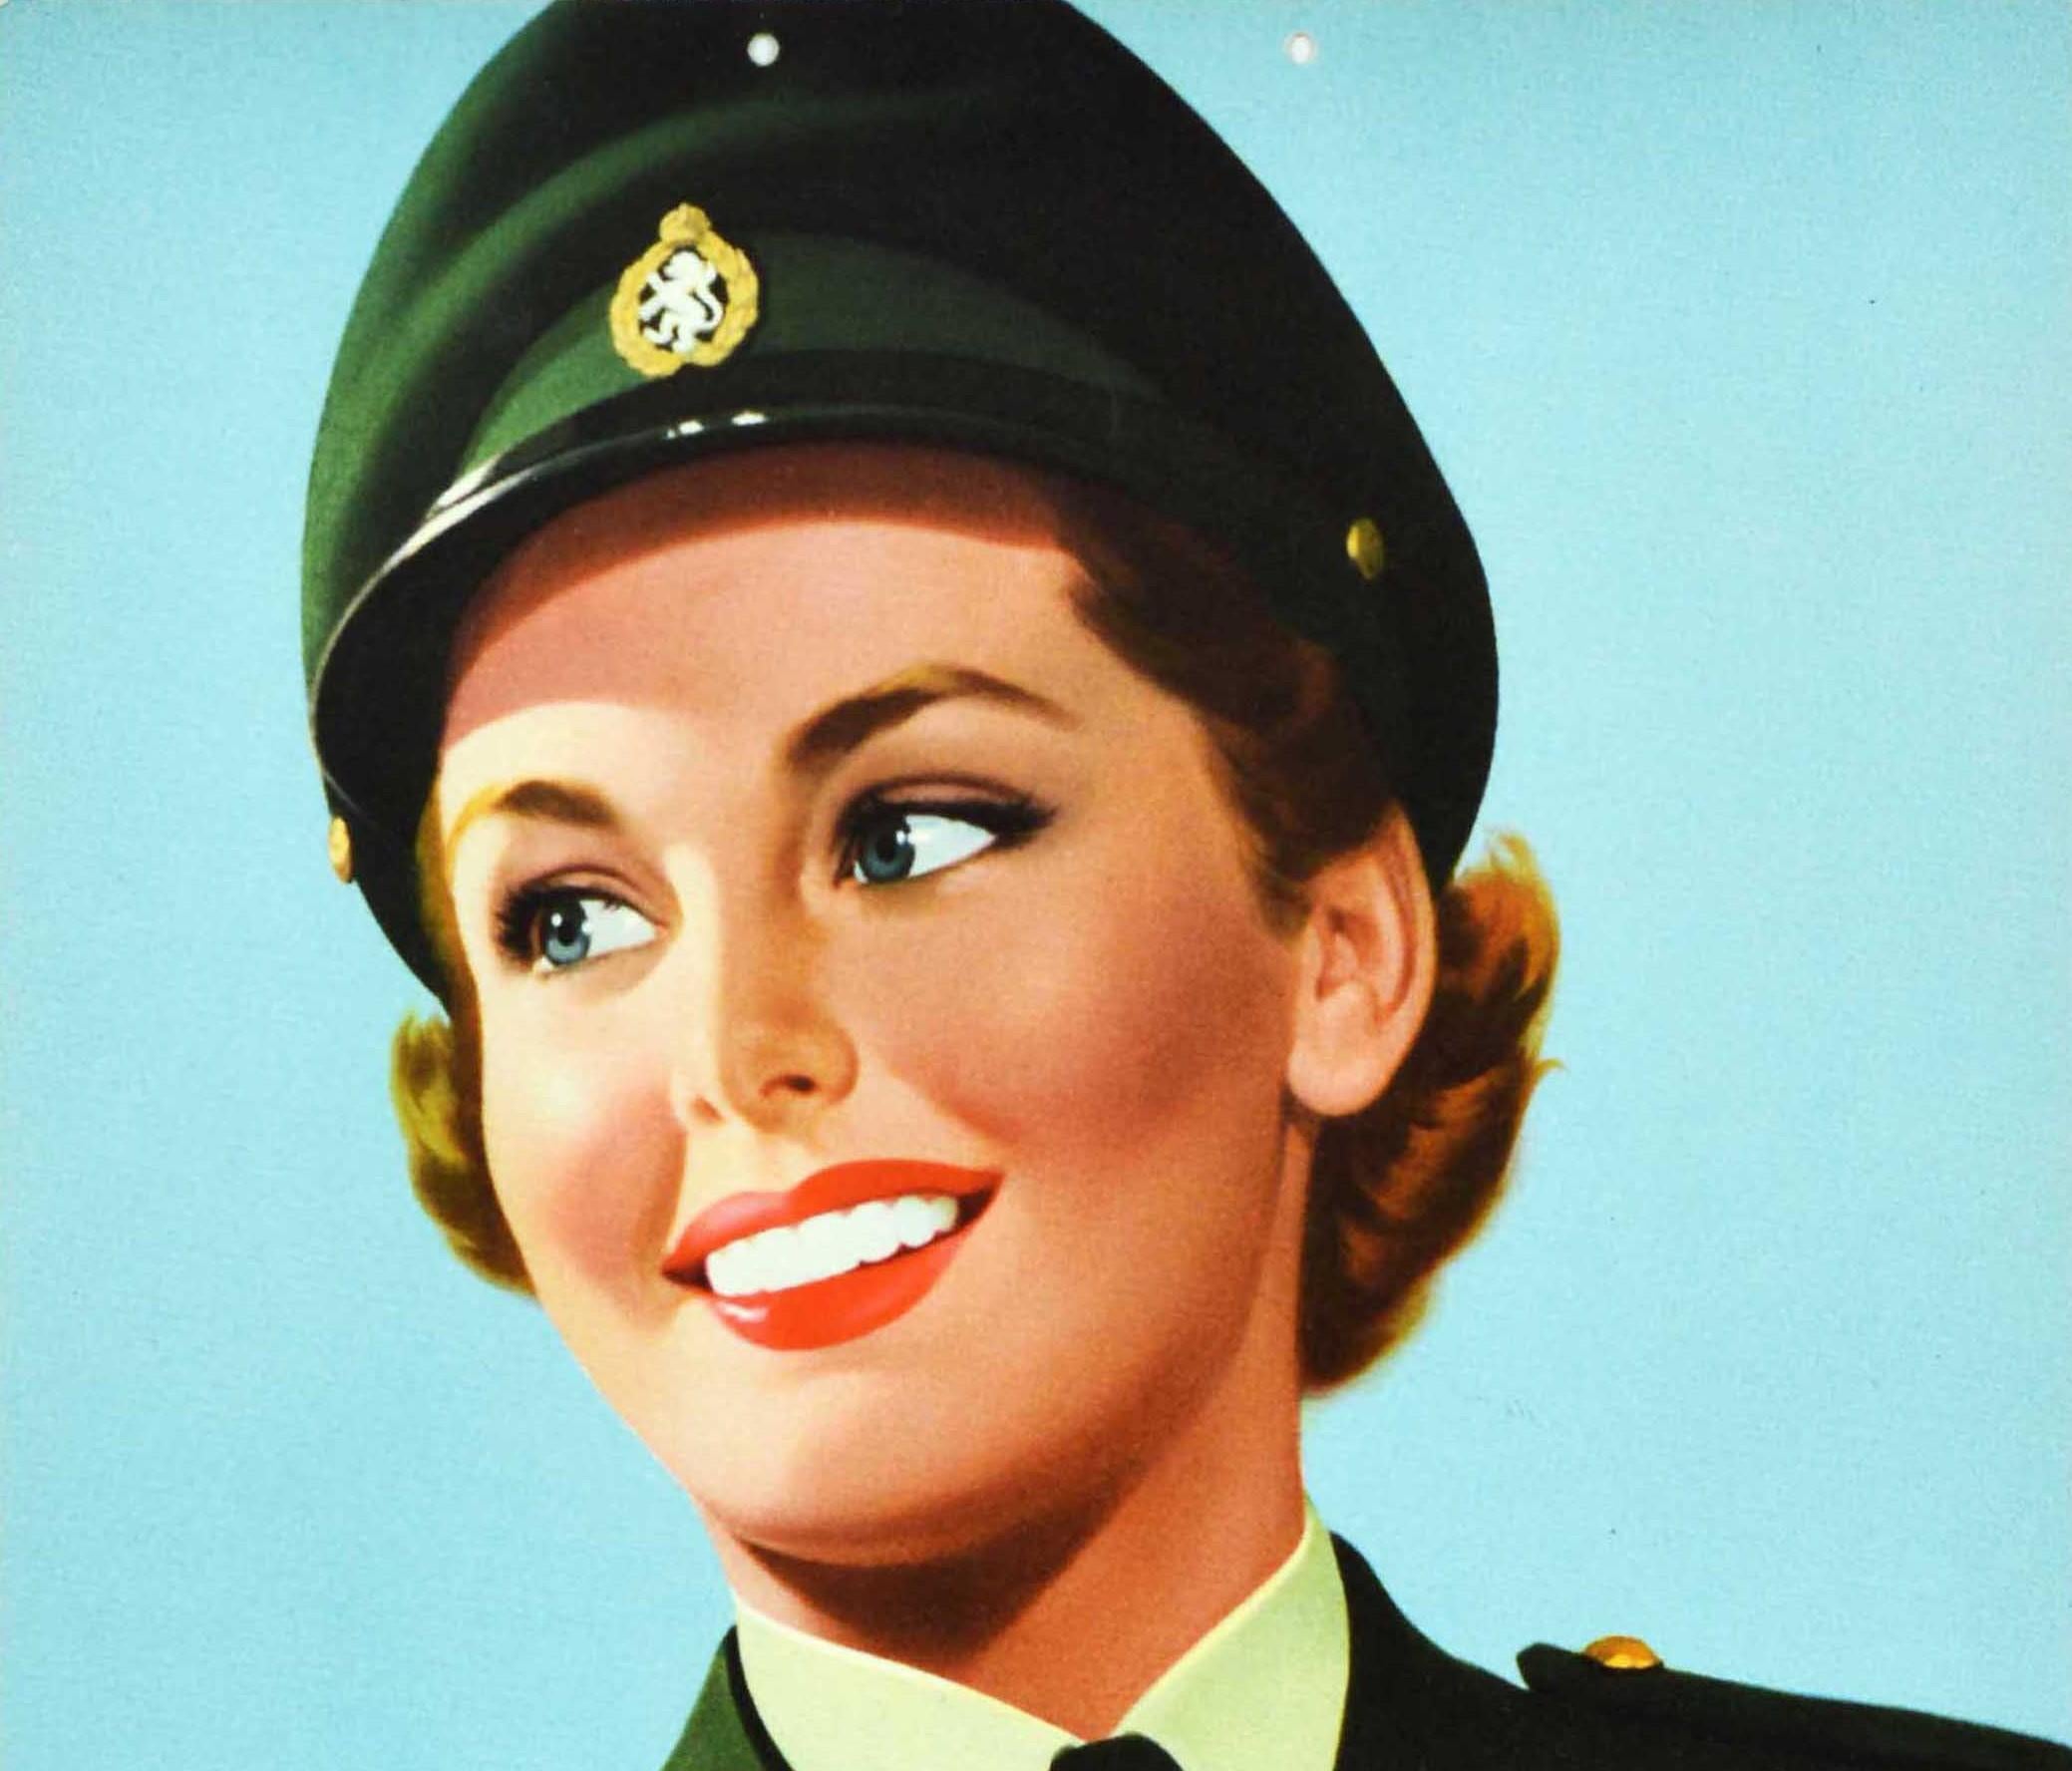 Original vintage British Army military recruitment poster for the Women's Royal Army Corp (1949-1992): WRAC A Fine Career For You featuring a smiling young lady in a green uniform against a pale blue sky background, the title and rest of the text